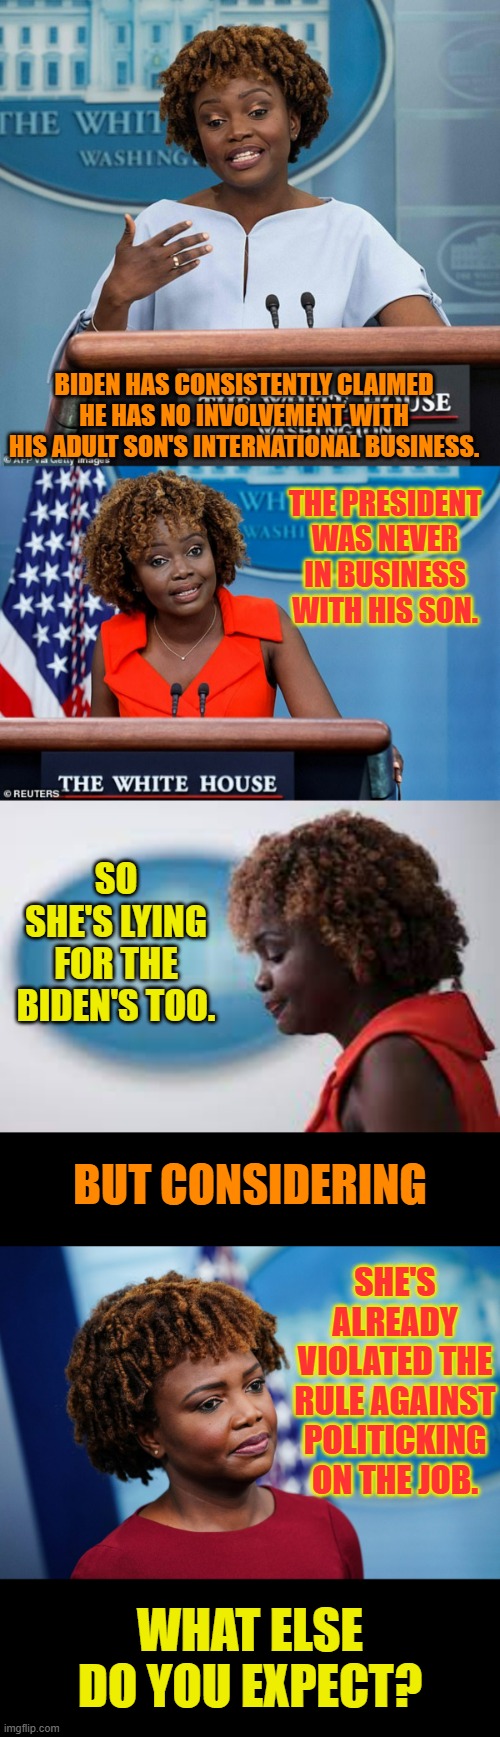 A Slight of Tongue And More | BIDEN HAS CONSISTENTLY CLAIMED HE HAS NO INVOLVEMENT WITH HIS ADULT SON'S INTERNATIONAL BUSINESS. THE PRESIDENT WAS NEVER IN BUSINESS WITH HIS SON. SO SHE'S LYING FOR THE BIDEN'S TOO. BUT CONSIDERING; SHE'S ALREADY VIOLATED THE RULE AGAINST POLITICKING ON THE JOB. WHAT ELSE DO YOU EXPECT? | image tagged in memes,politics,press secretary,liar,no,rules | made w/ Imgflip meme maker